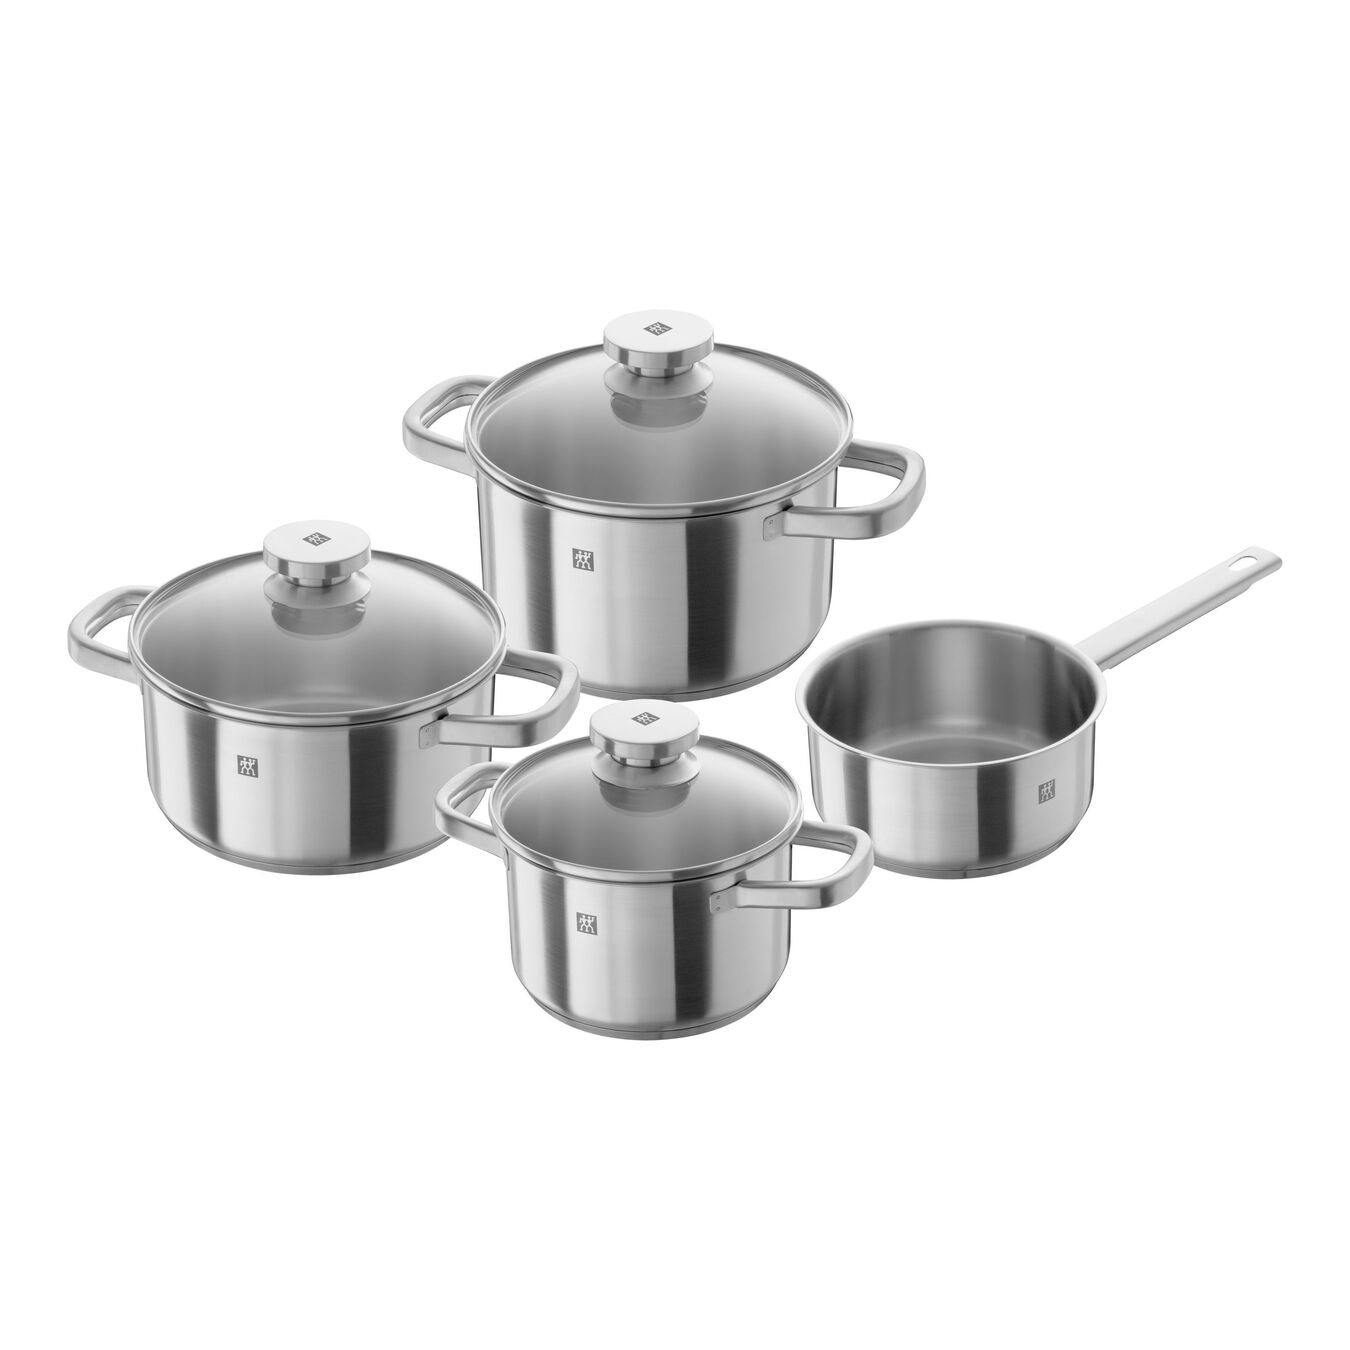 Zwilling Twin Classic, 9pc 18/10 brushed stainless steel cookware